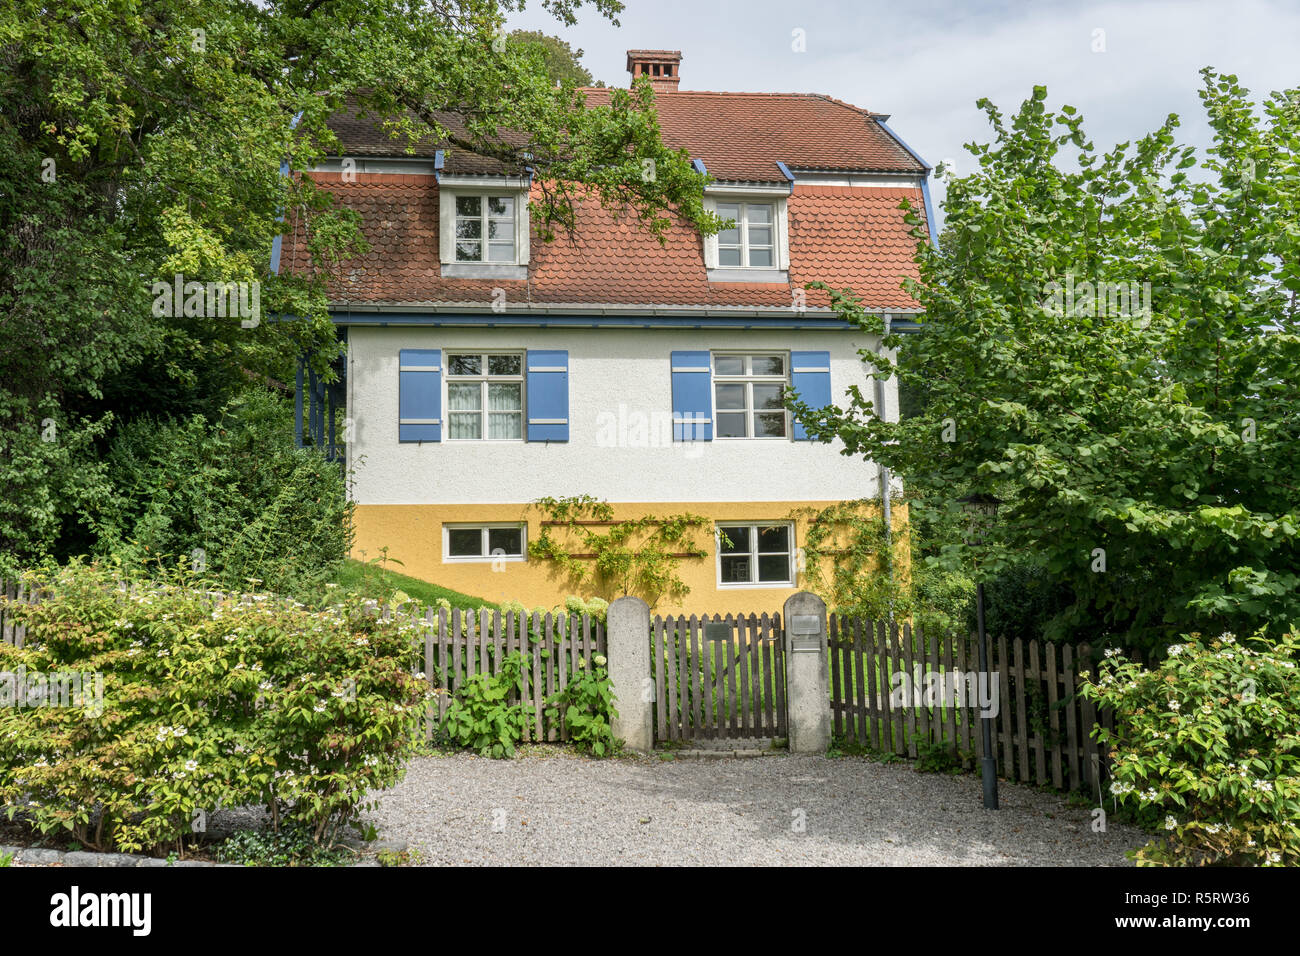 Gabriele MÃ¼nter House with Garden and trees in Murnau Bavaria, Germany Stock Photo